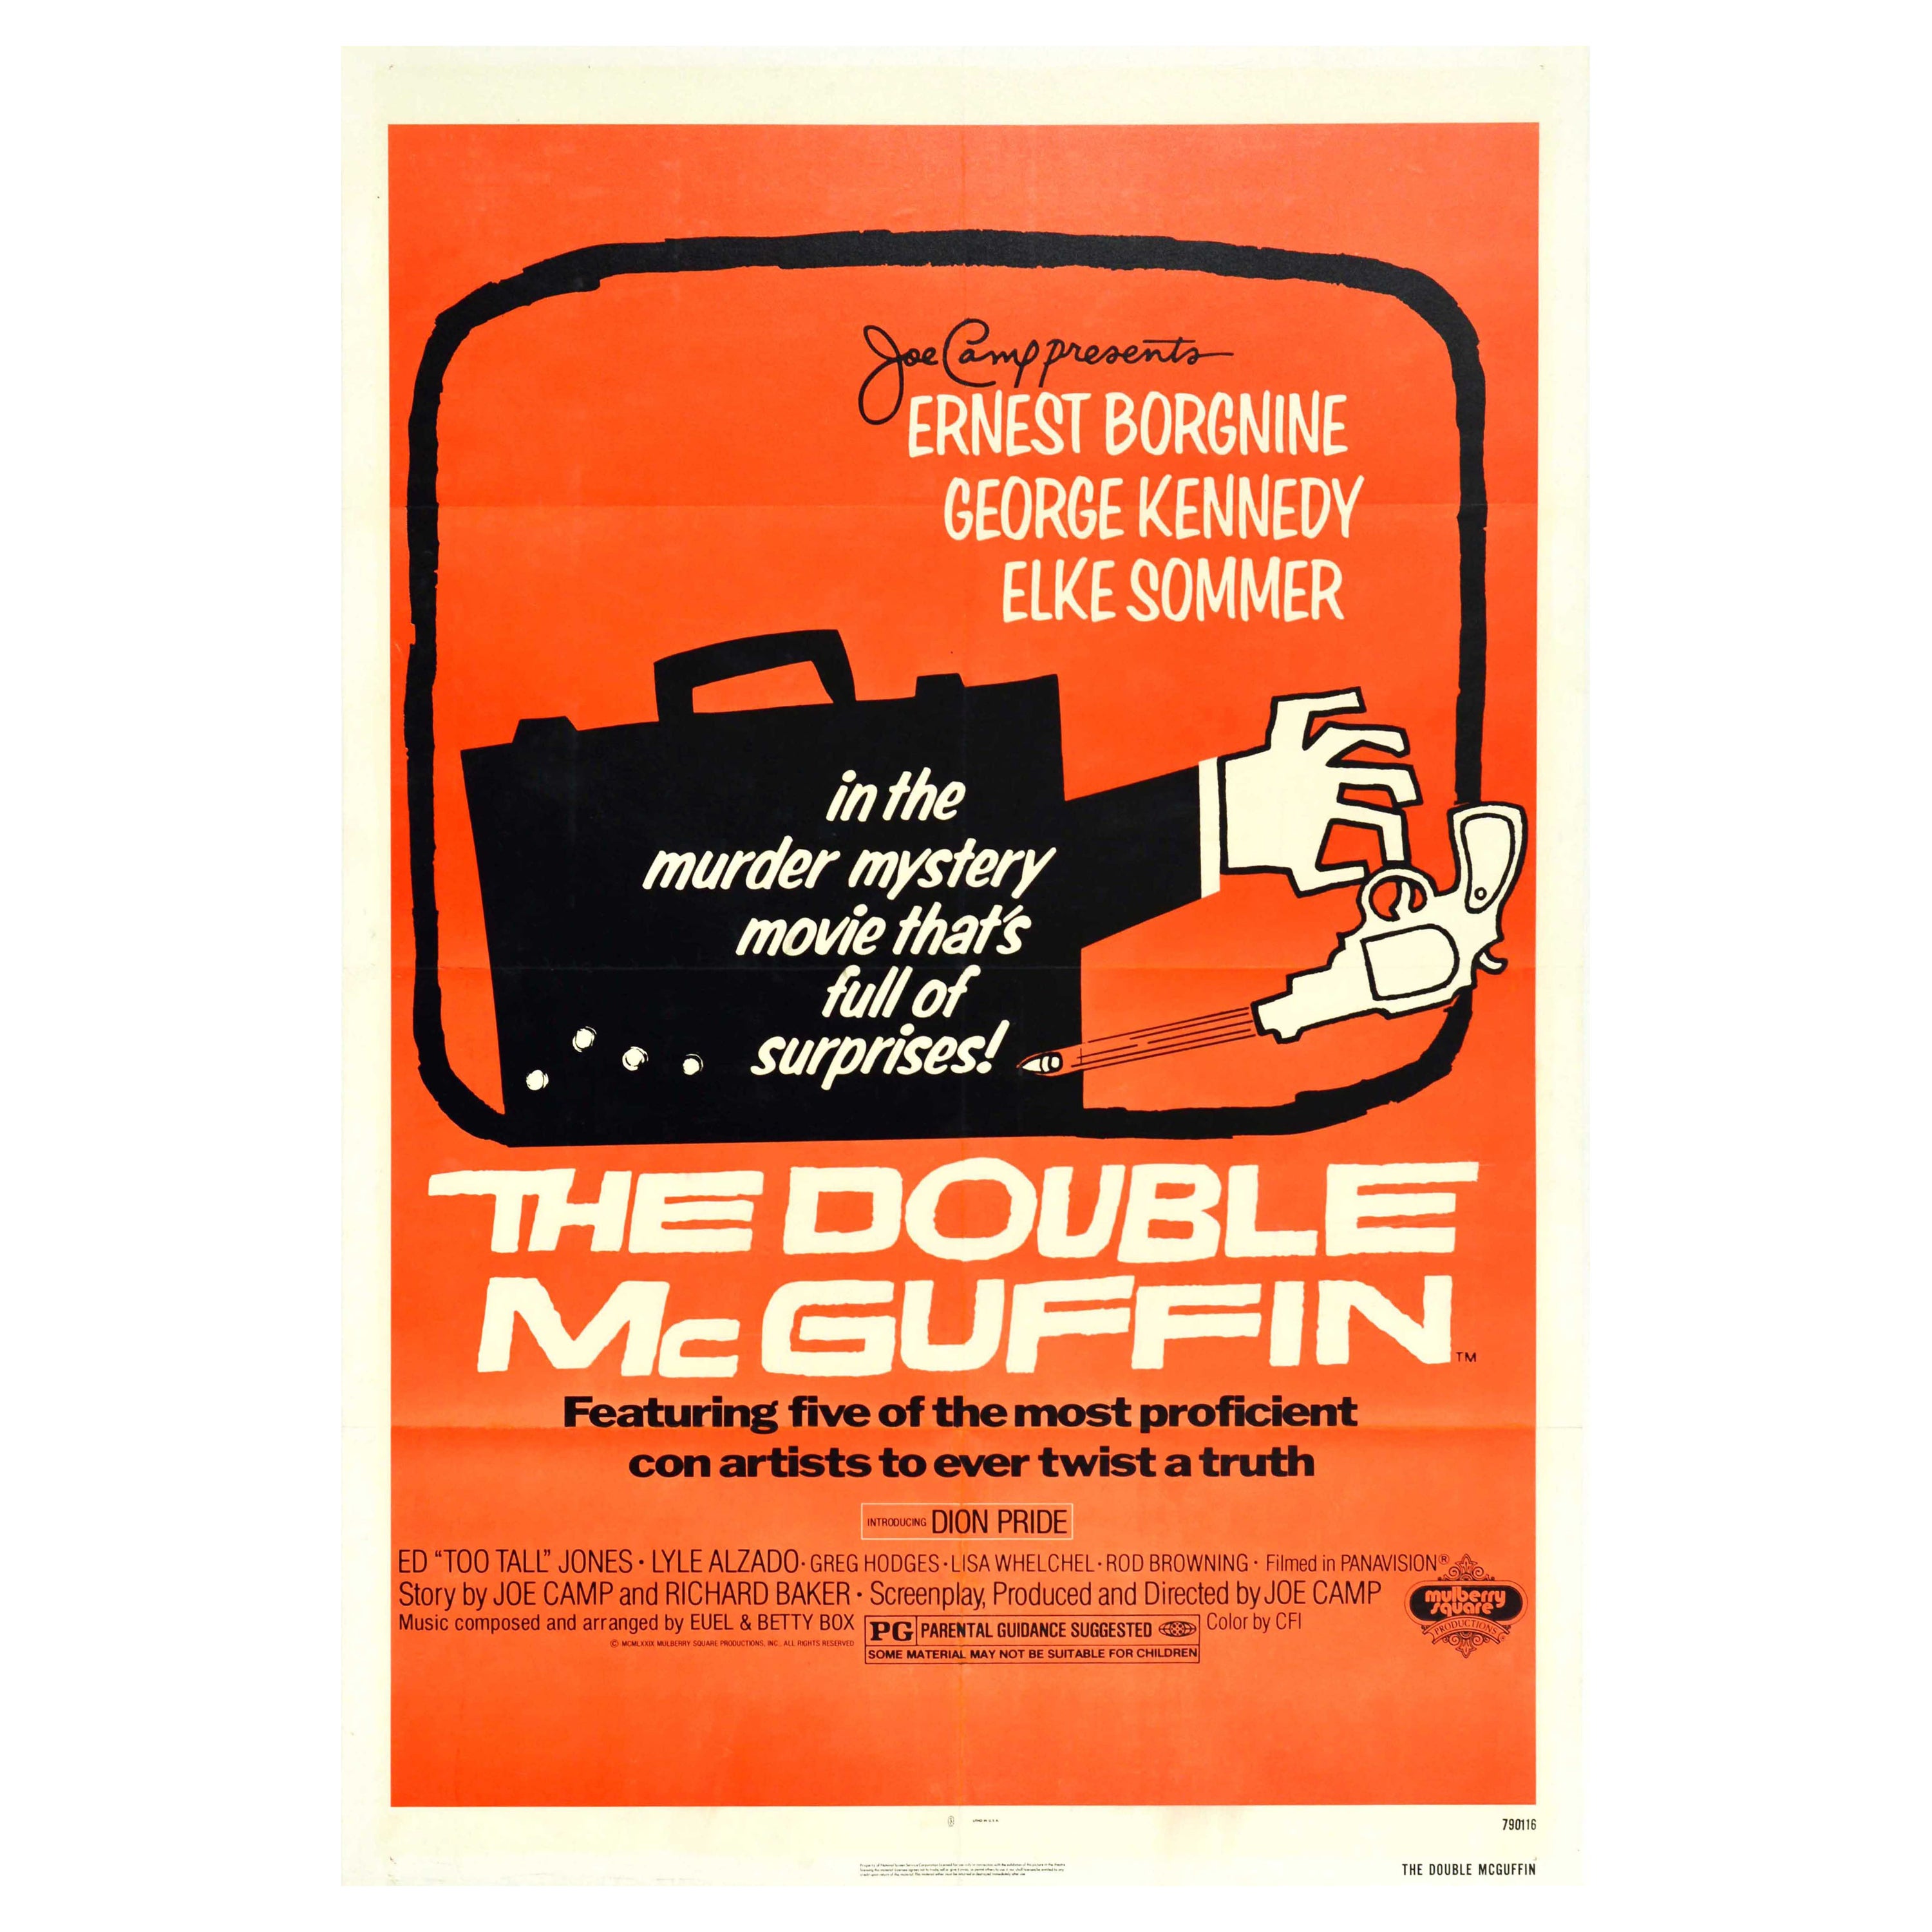 Original Vintage Poster For The Double McGuffin Con Artists Murder Mystery Movie For Sale